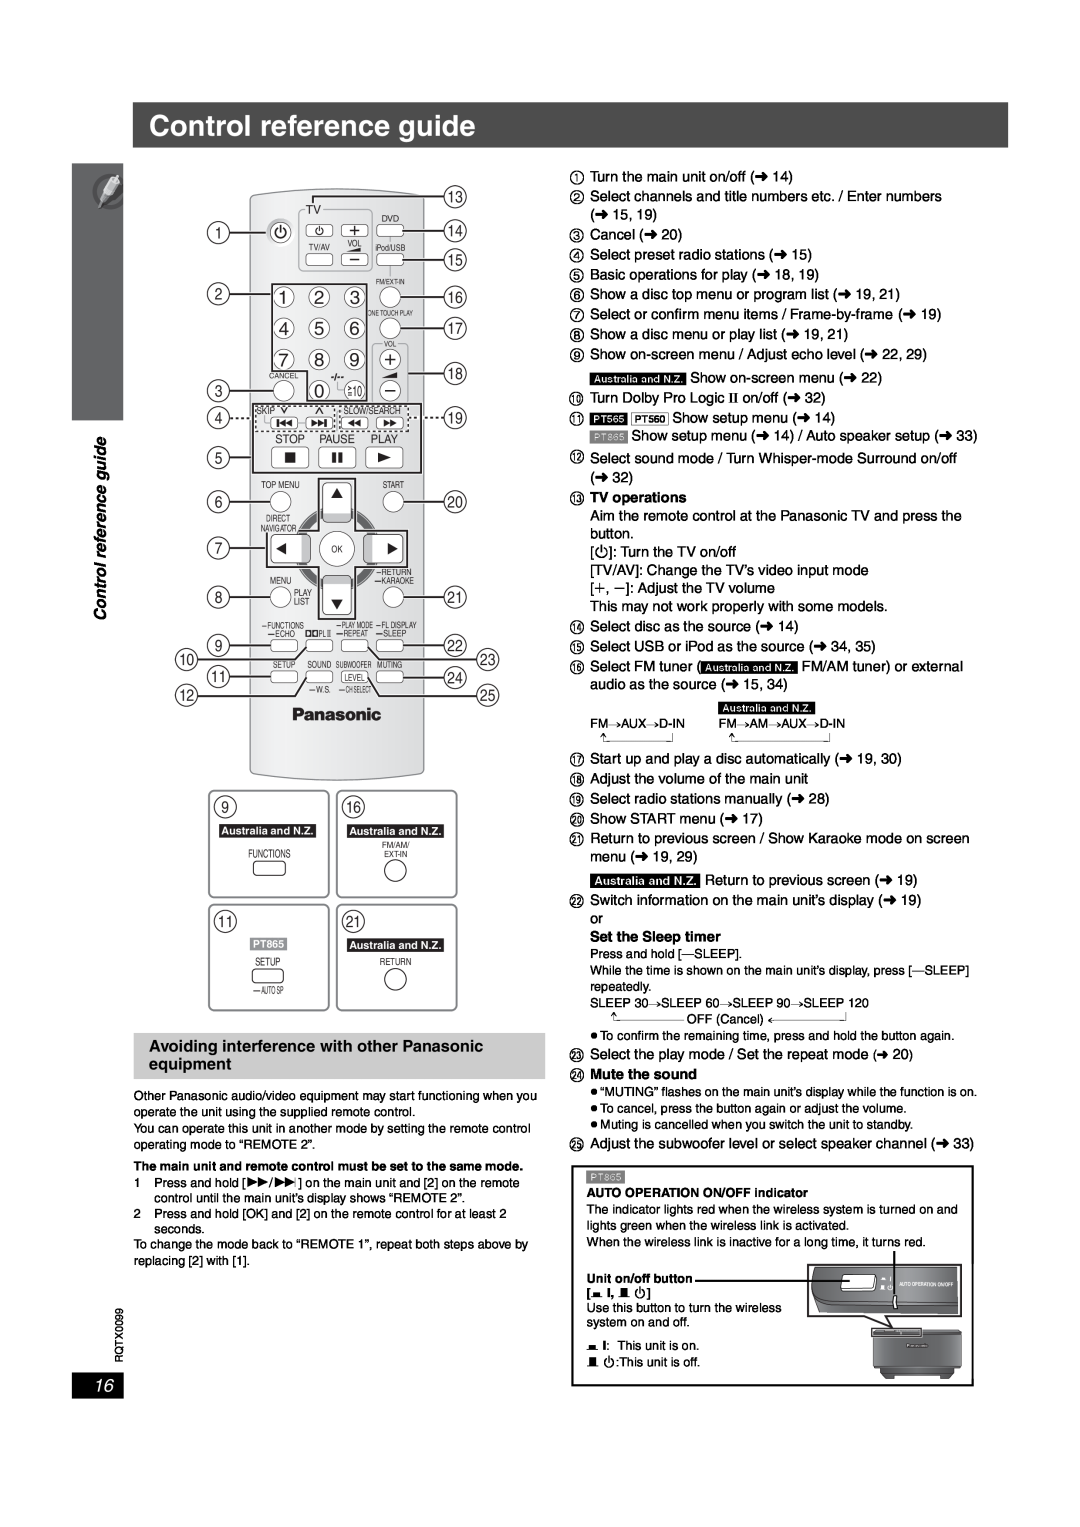 Panasonic SC-PT560, SC-PT565, SC-PT865 operating instructions Control reference guide 